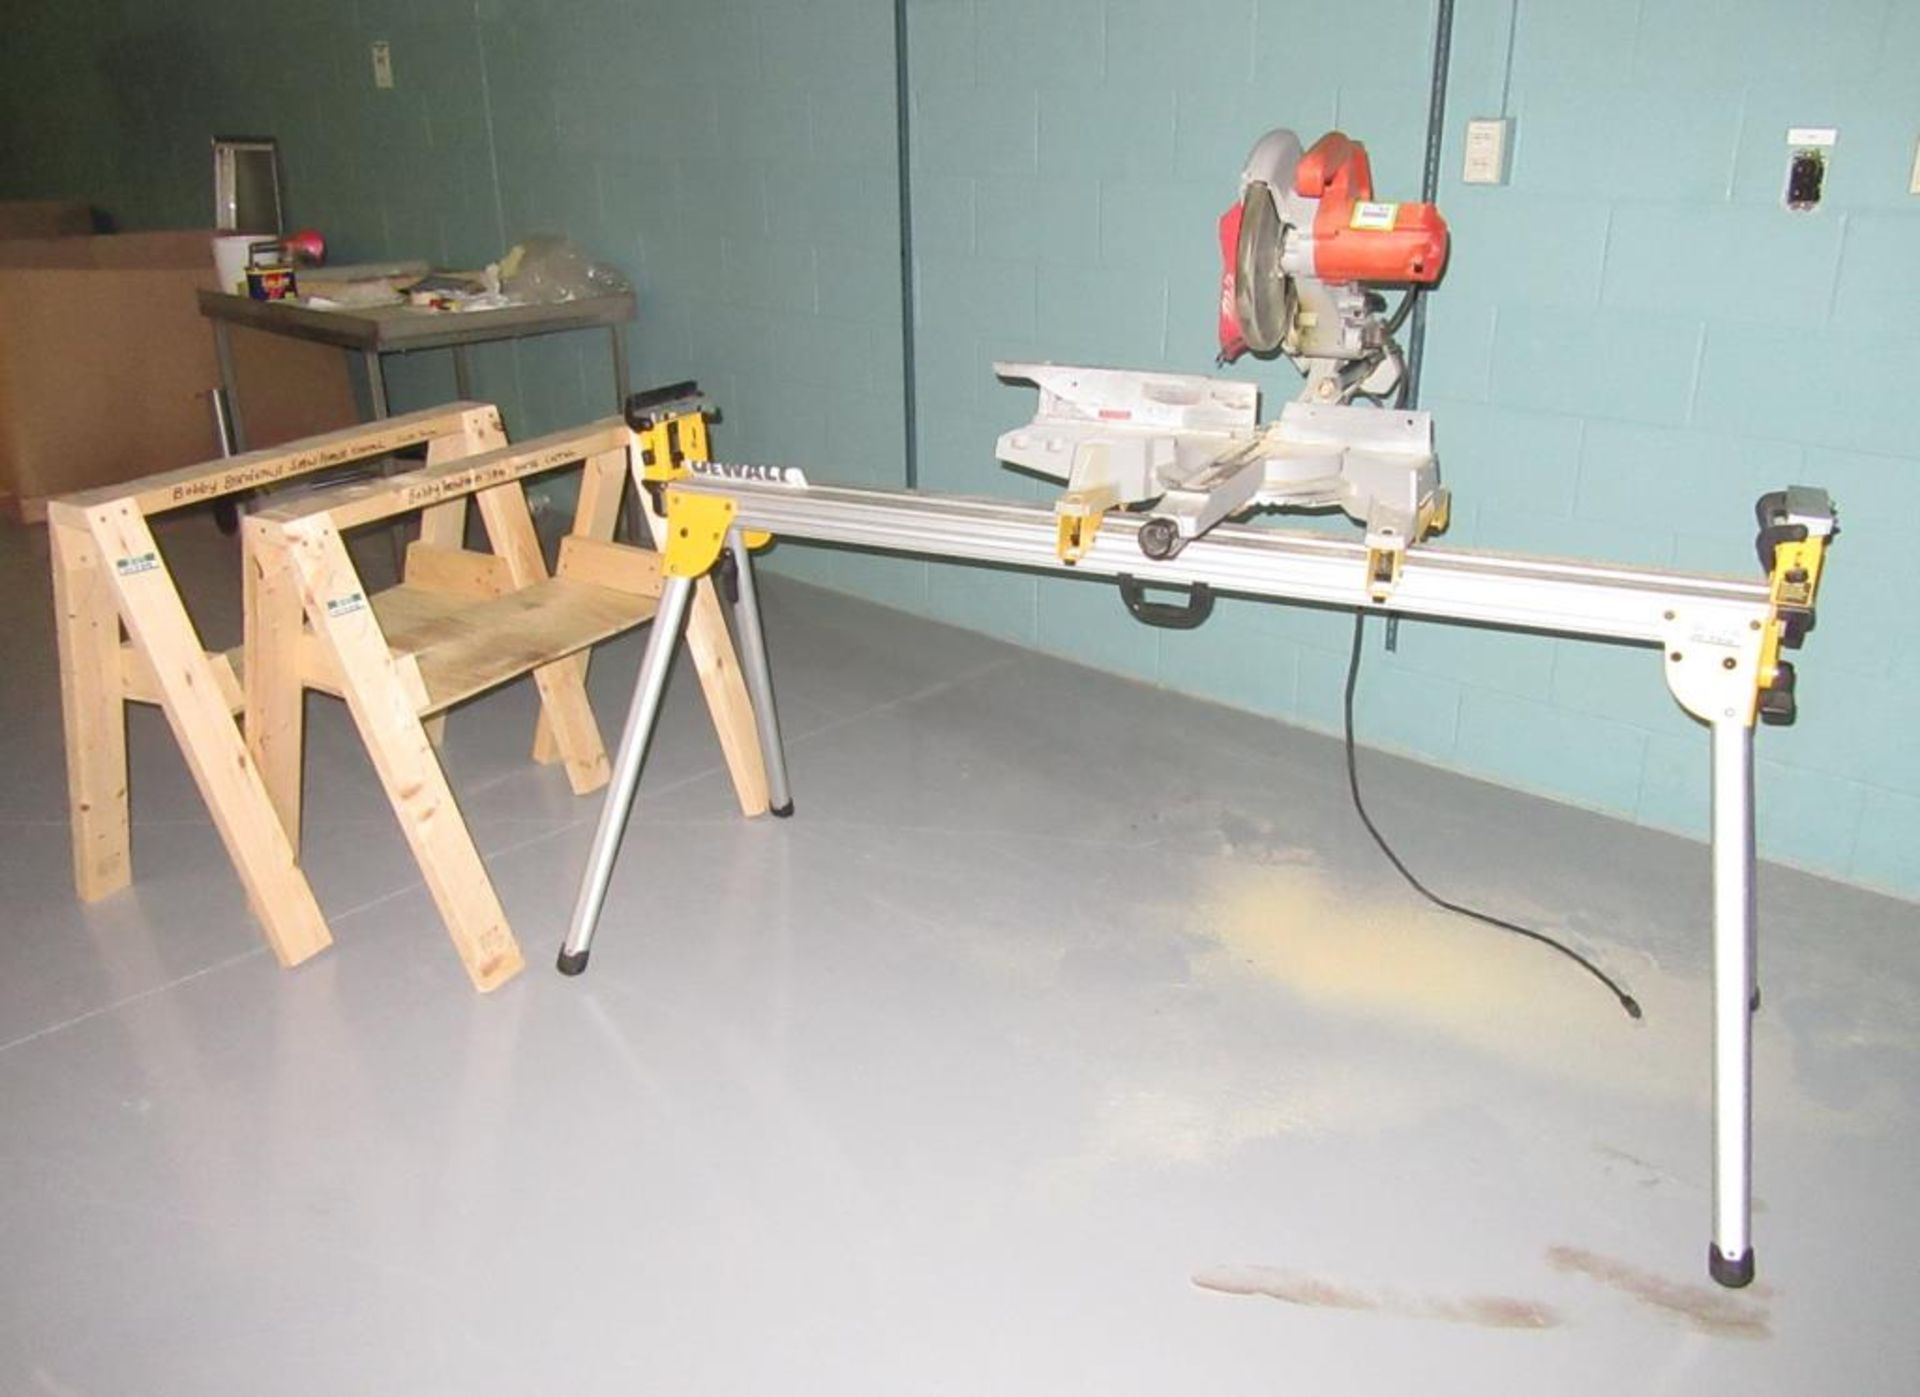 Milwaukee 6496 Miter Saw; 10" Compound Miter Saw with 72"L Stand & (2) Wooden Sawhorses. HIT#